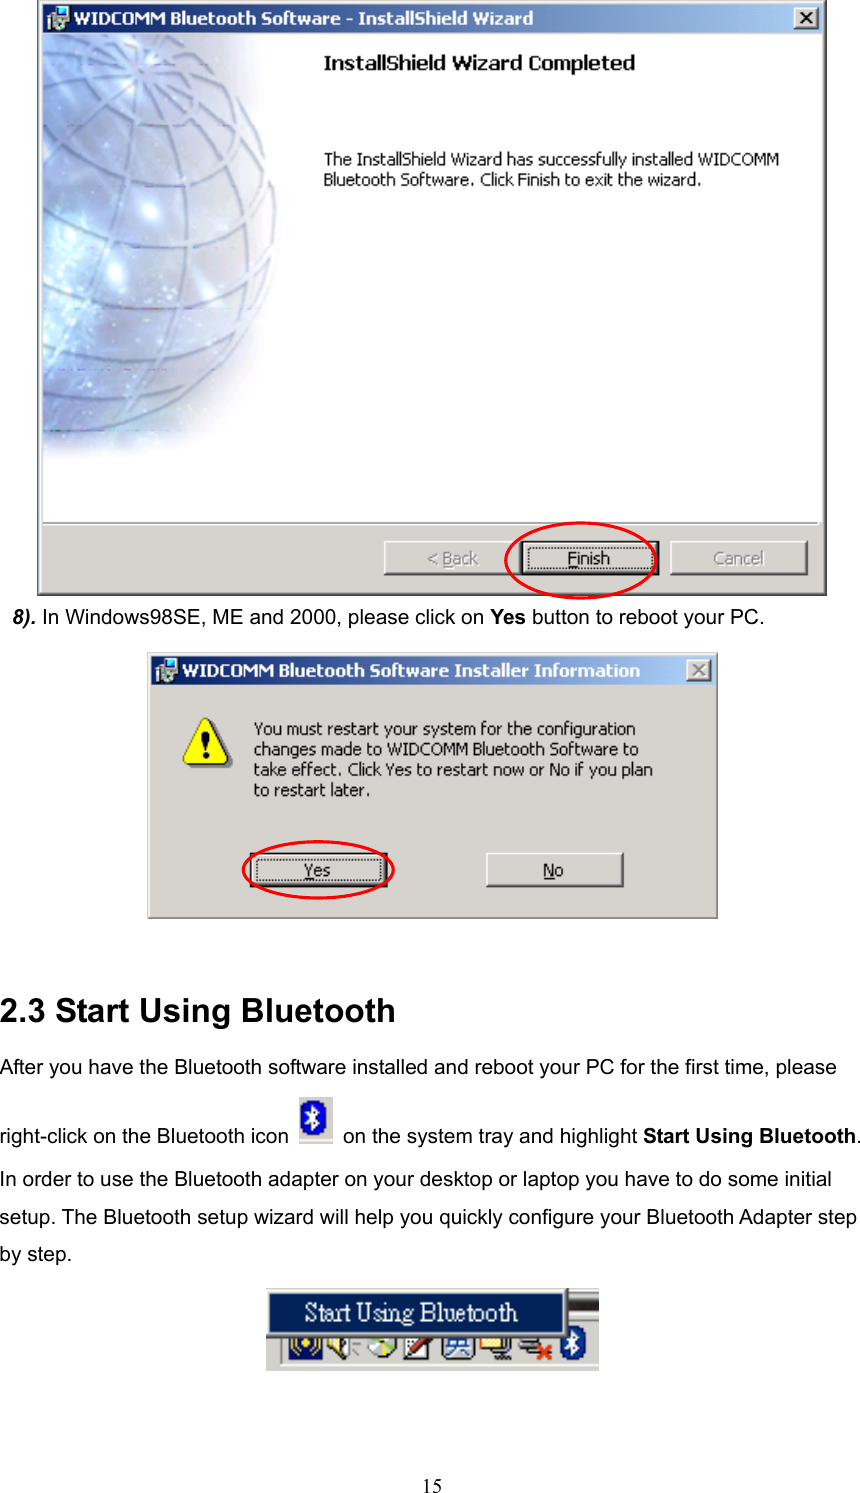  15  8). In Windows98SE, ME and 2000, please click on Yes button to reboot your PC.   2.3 Start Using Bluetooth After you have the Bluetooth software installed and reboot your PC for the first time, please right-click on the Bluetooth icon    on the system tray and highlight Start Using Bluetooth. In order to use the Bluetooth adapter on your desktop or laptop you have to do some initial setup. The Bluetooth setup wizard will help you quickly configure your Bluetooth Adapter step by step.     